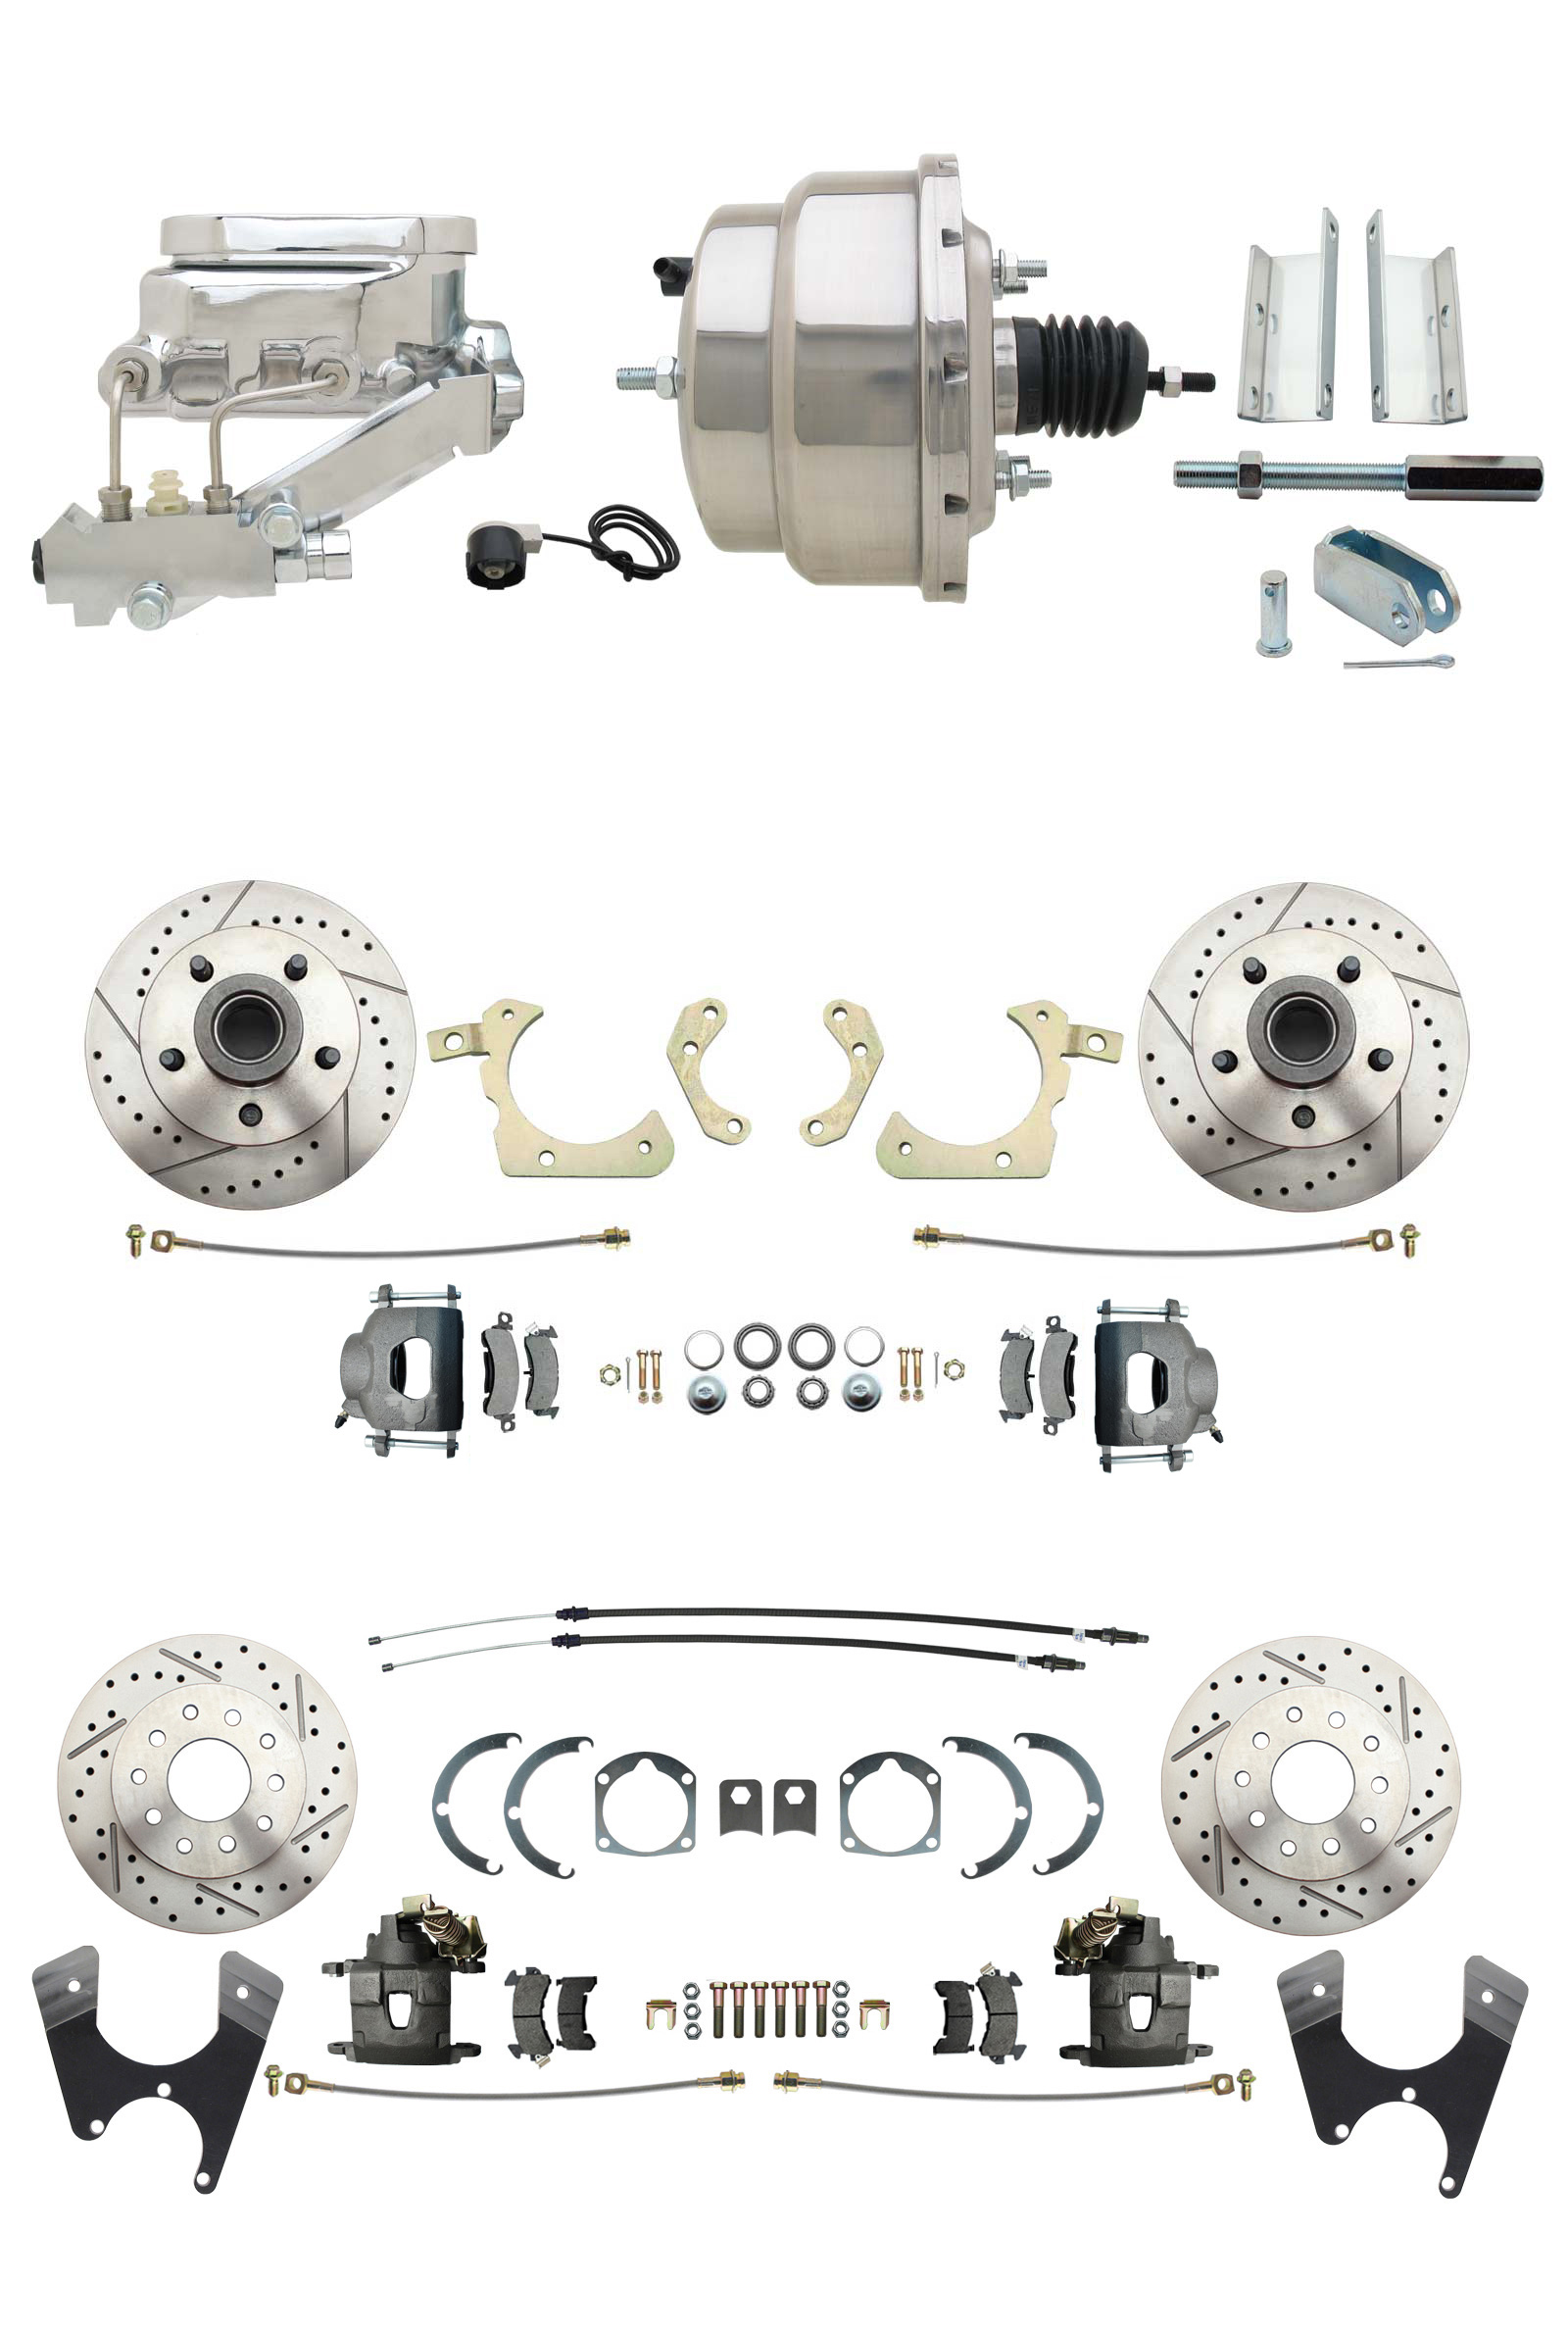 1955-1958 GM Full Size Disc Brake Kit Drilled/Slotted Rotors (Impala, Bel Air, Biscayne) & 8 Dual Stainless Steel Booster Conversion Kit W/ Chrome Flat Top Master Cylinder Left Mount Disc/ Disc Proportioning Valve Kit